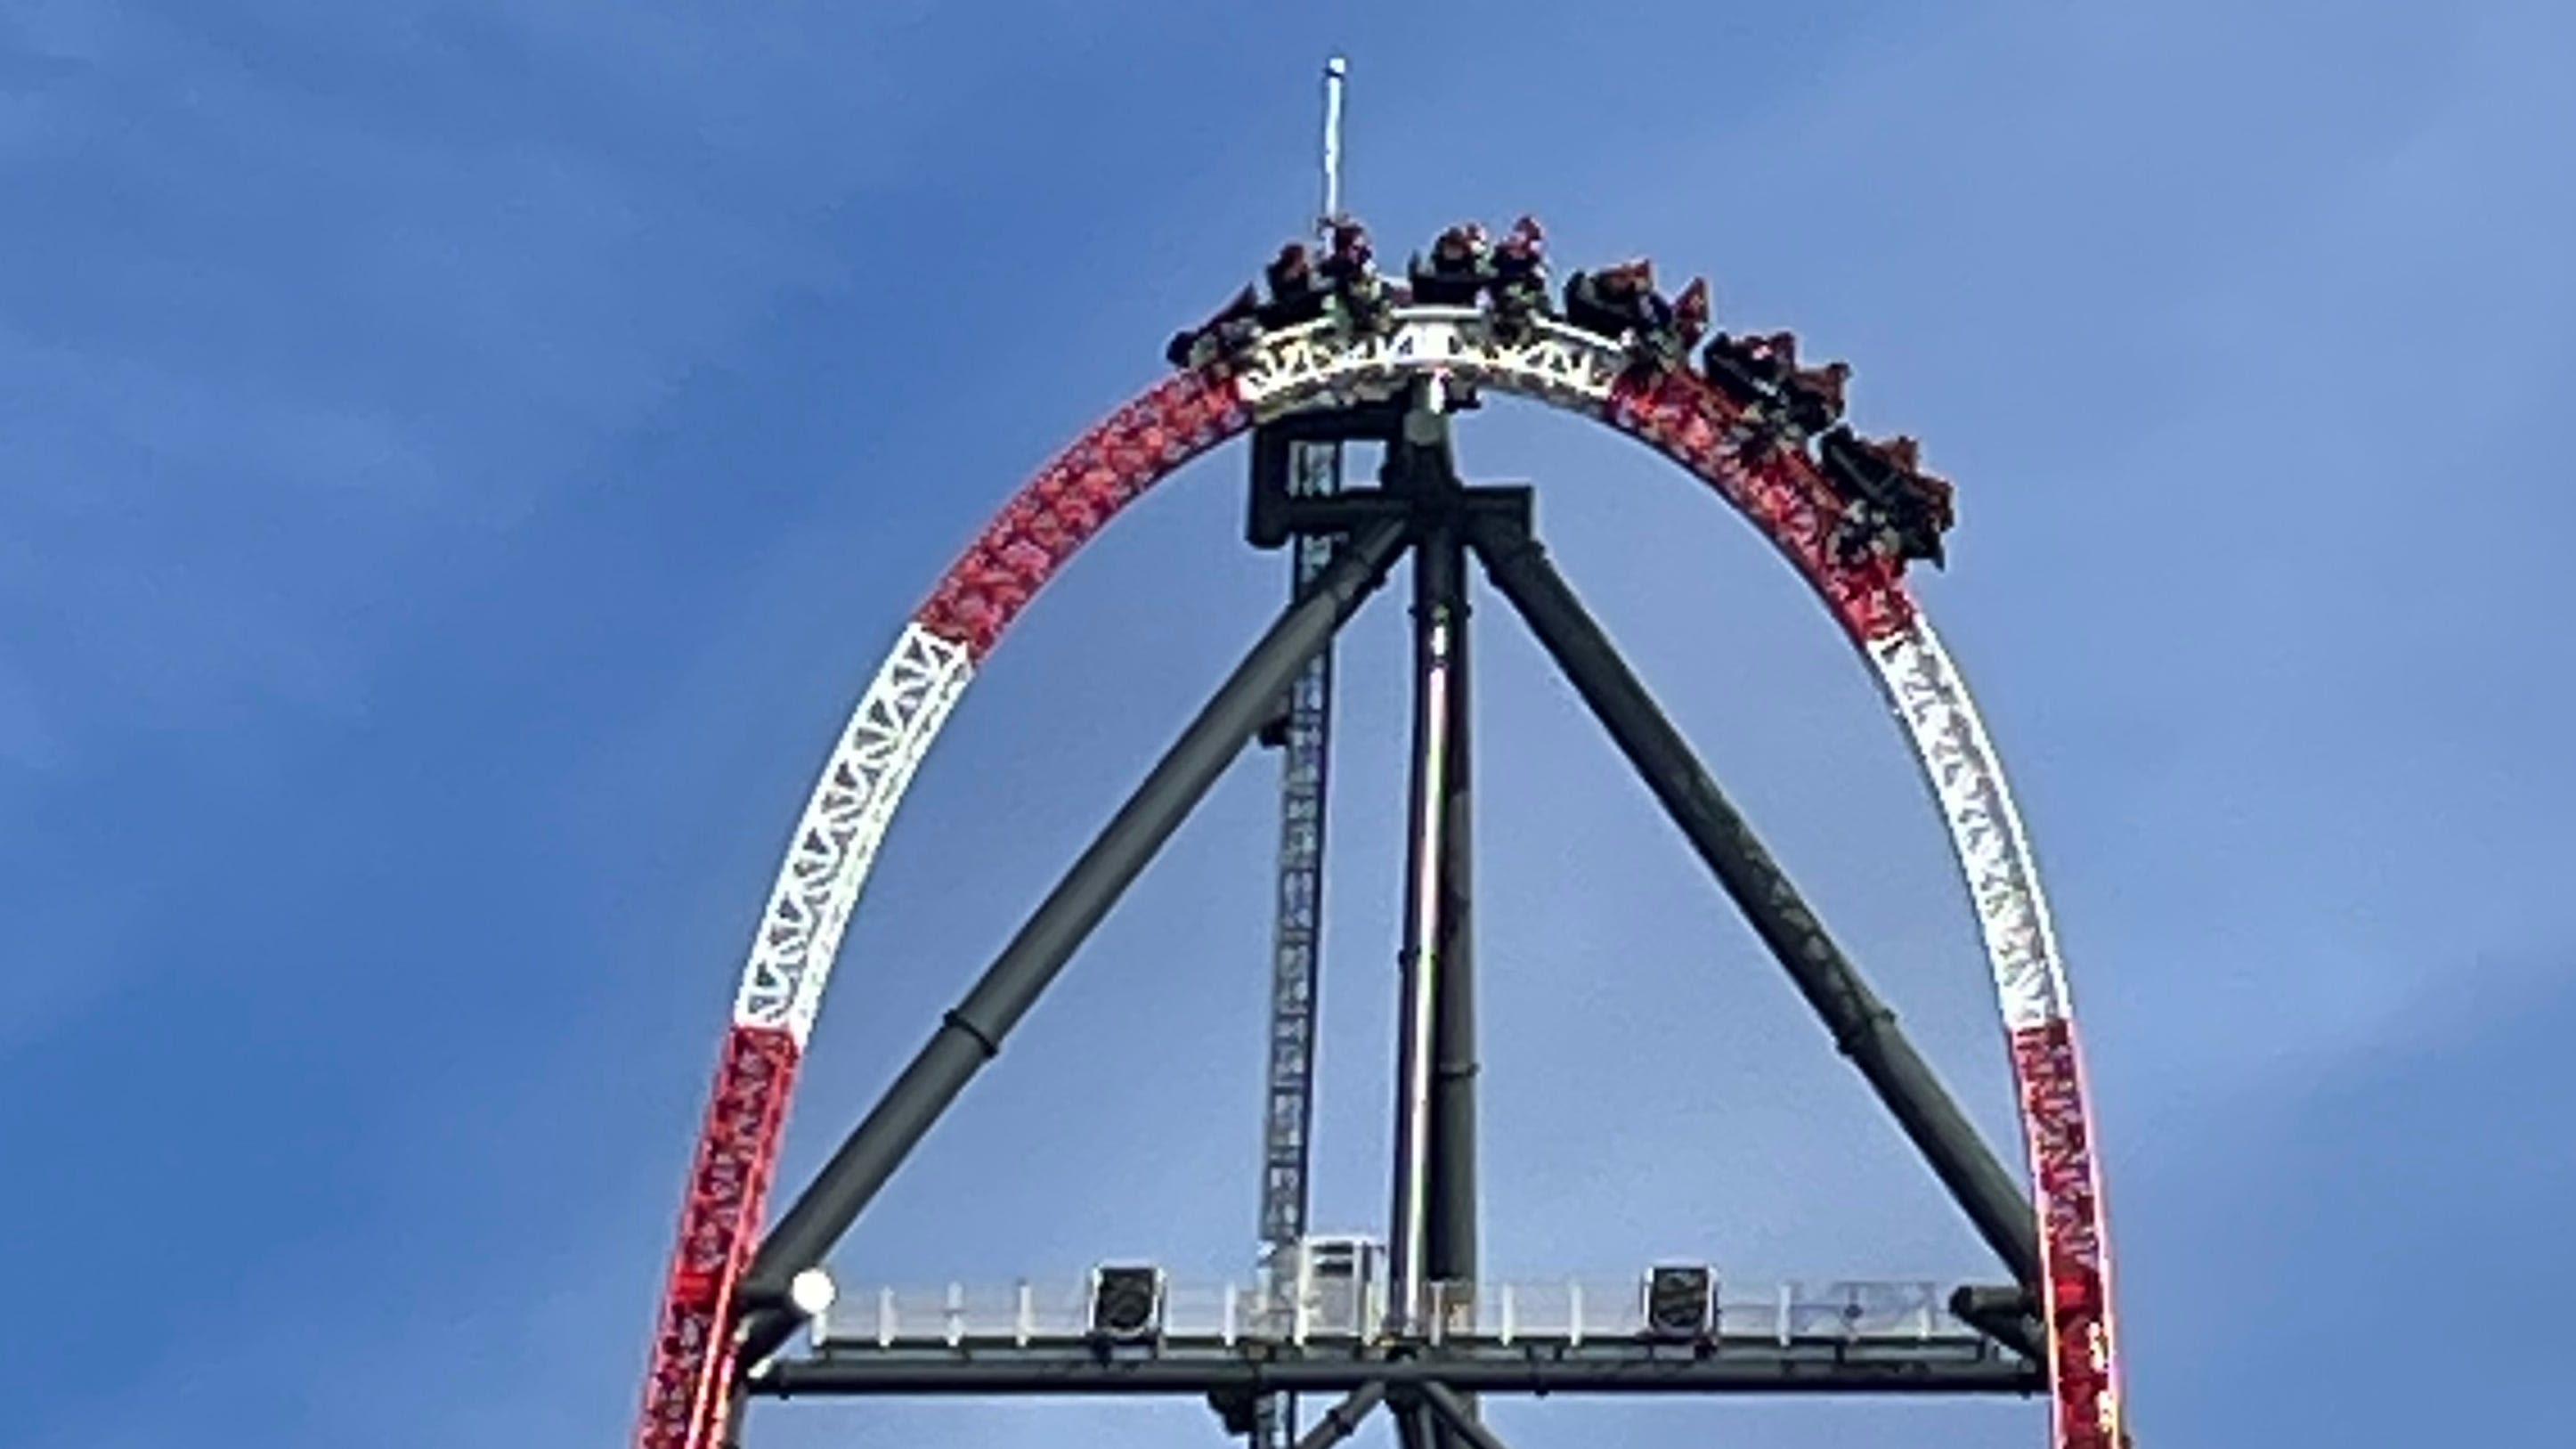 Top Thrill 2 at Cedar Point closed less than a month after opening for modifications